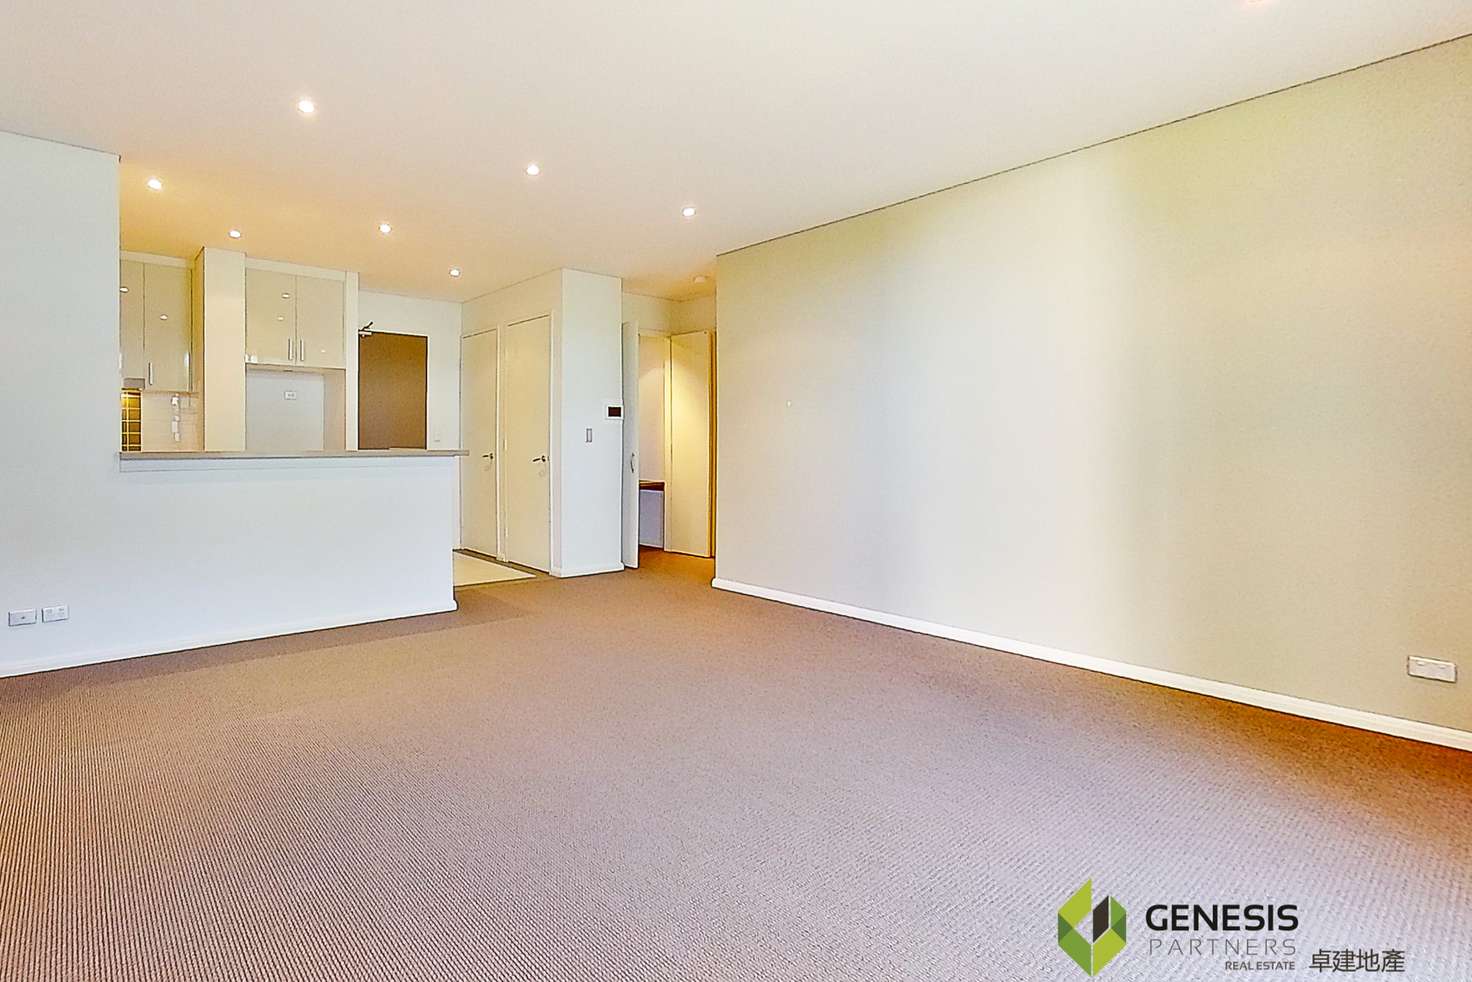 Main view of Homely apartment listing, 353/17-19 Memorial Avenue, St Ives NSW 2075